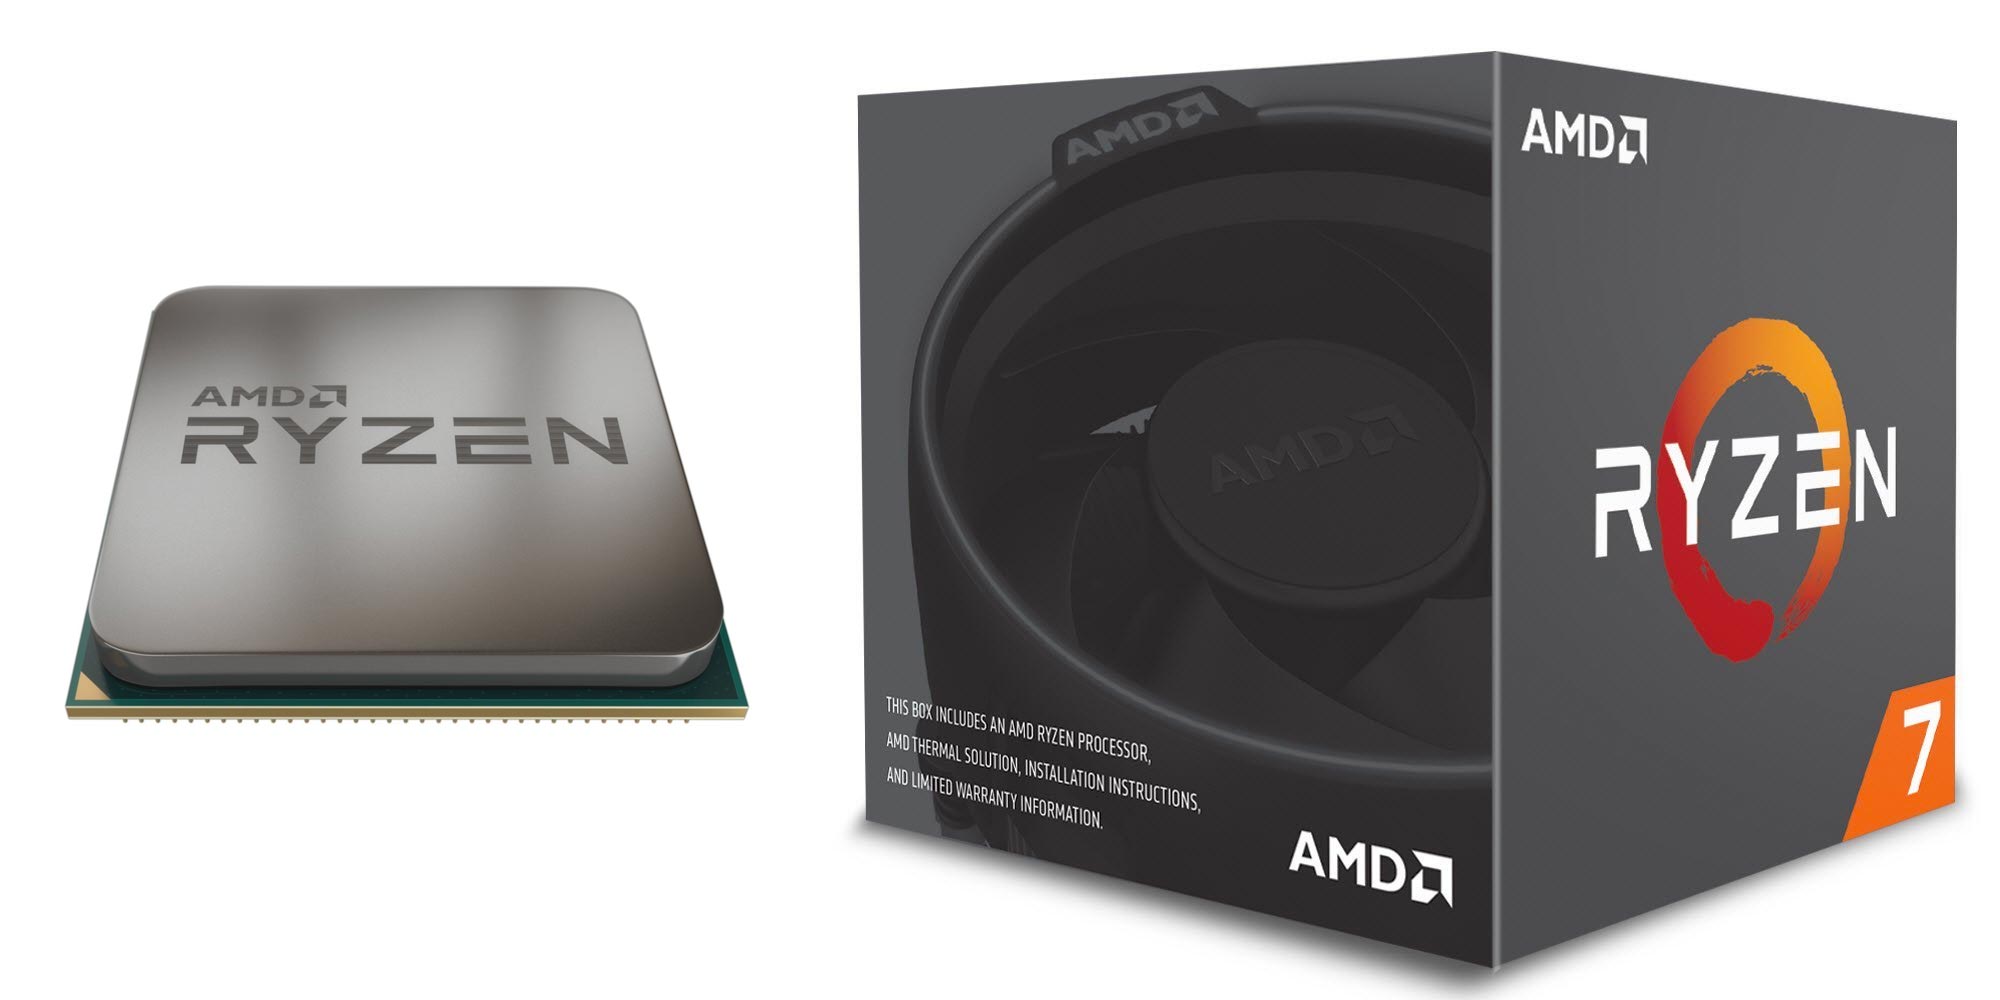 AMD's Ryzen 7 2700 8 core CPU drops to lowest price ever at $255 ...